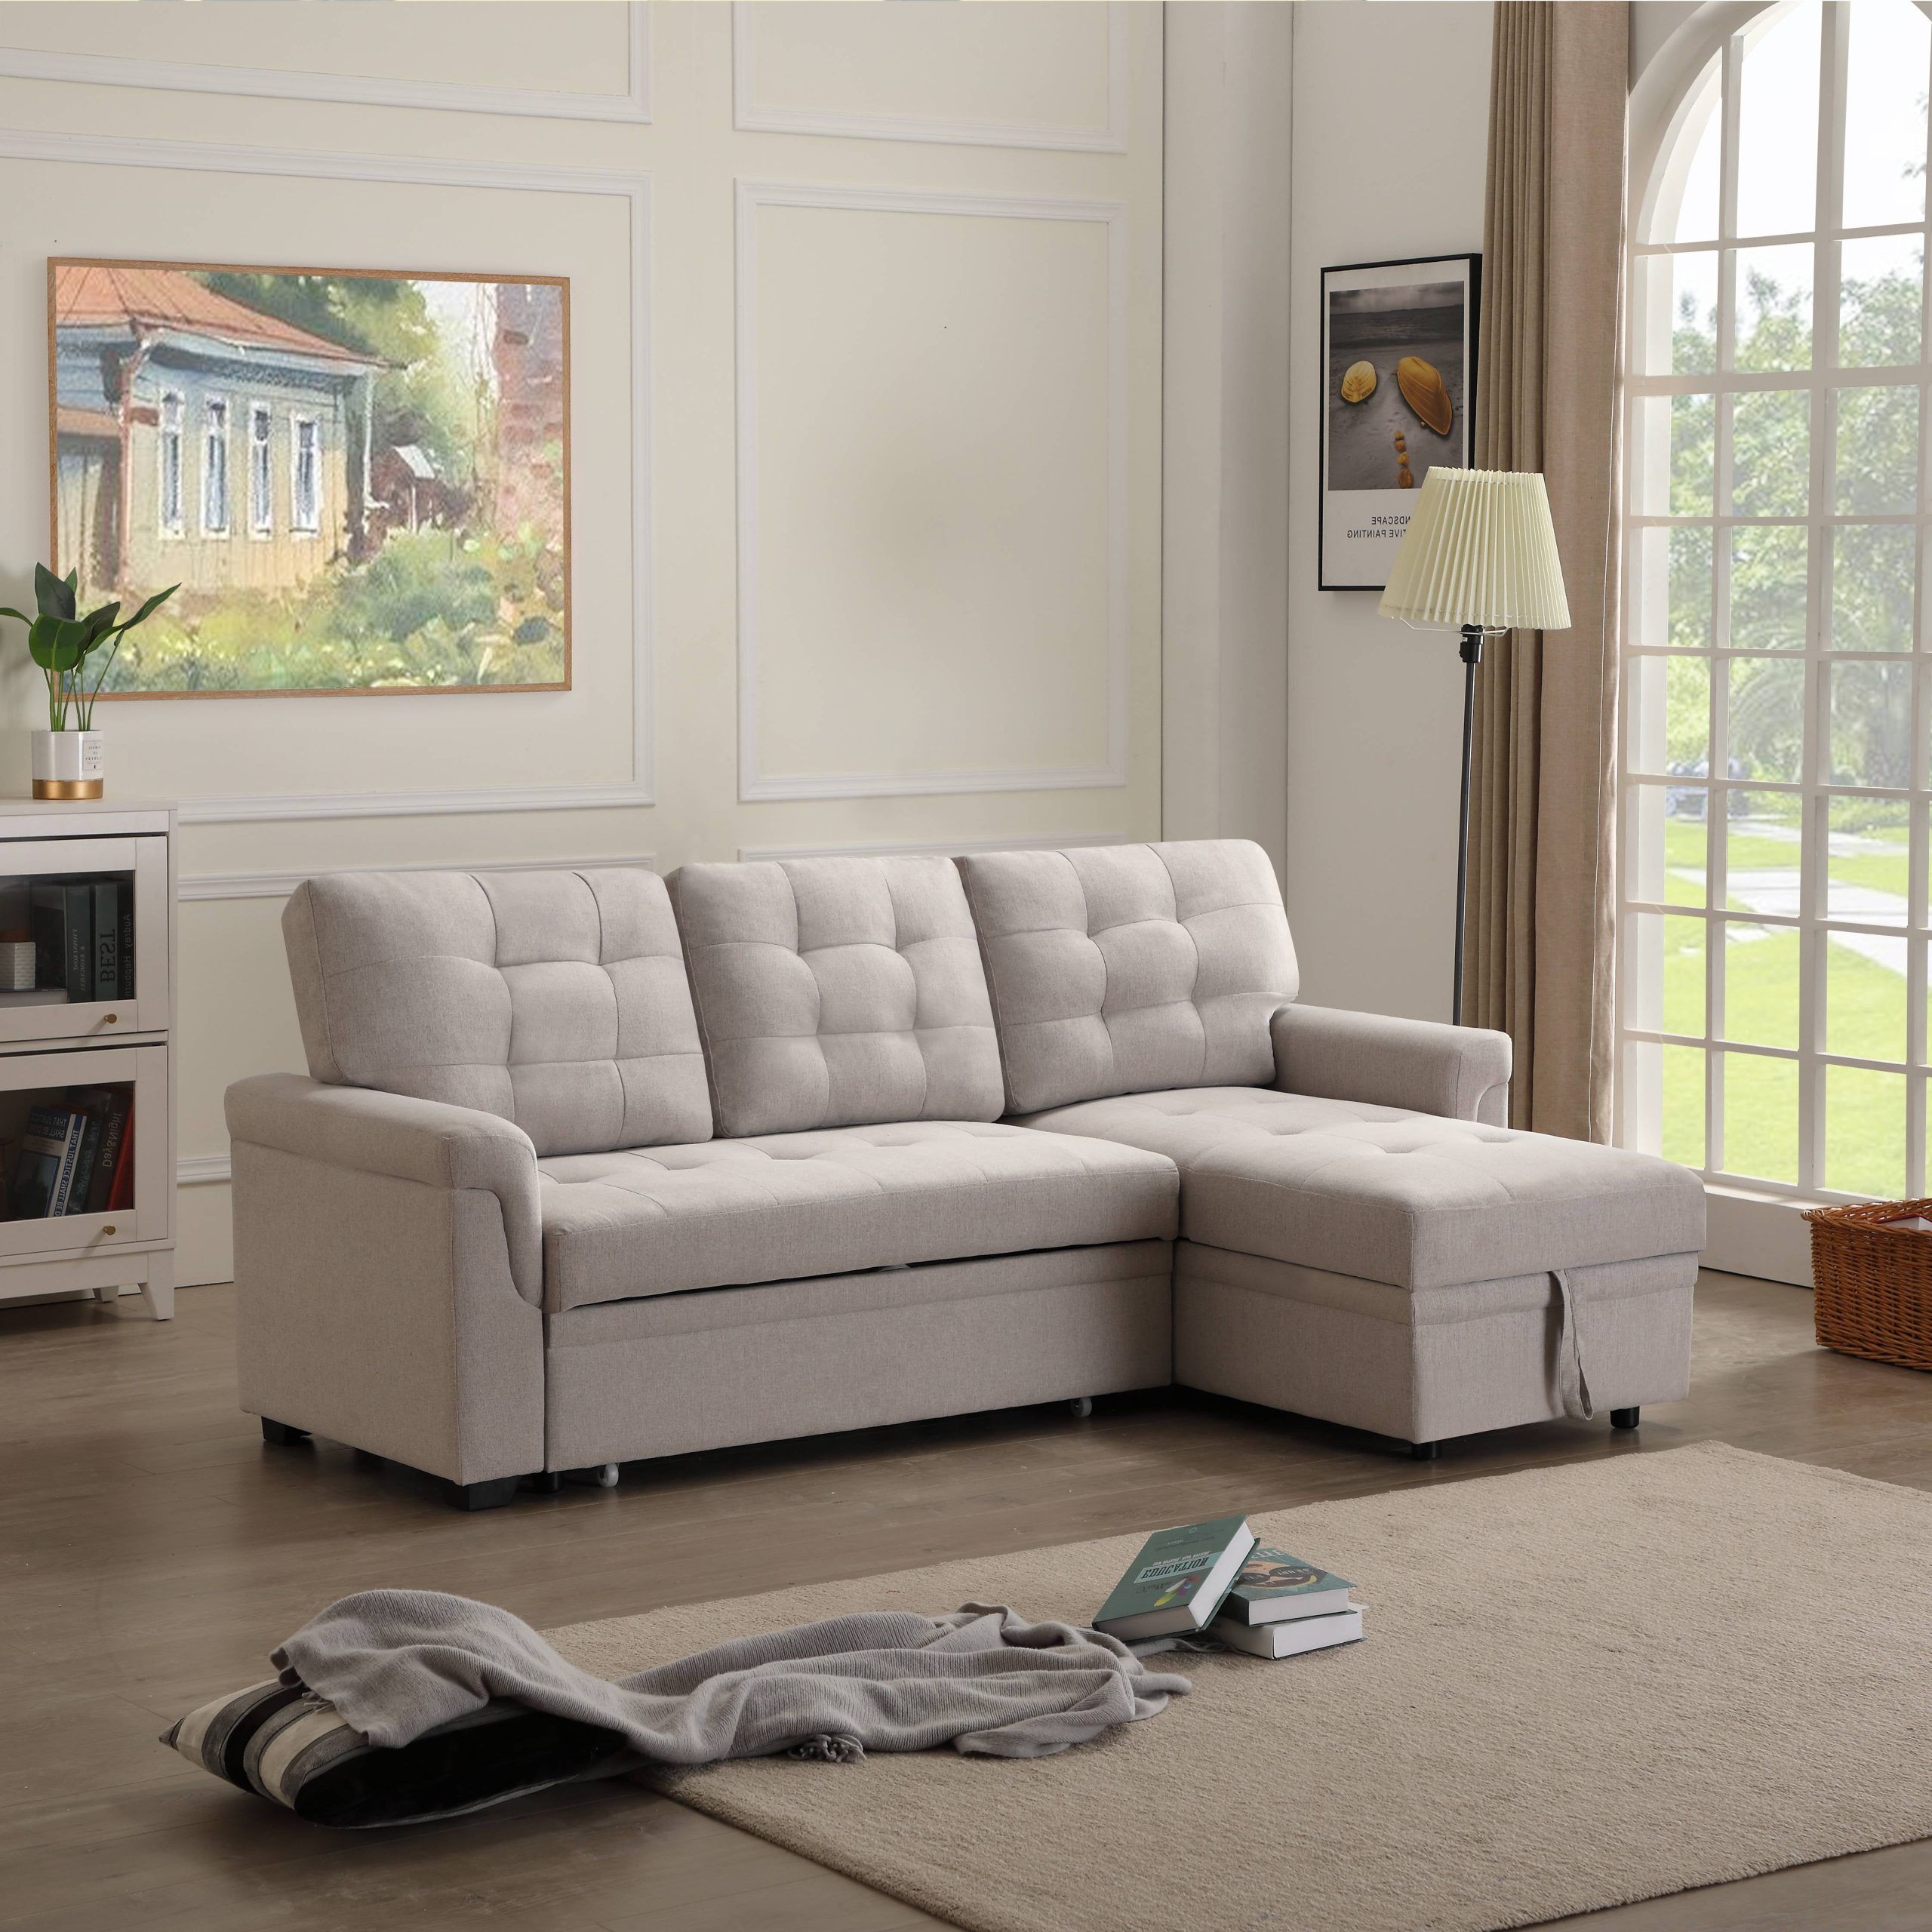 L Shaped Sectional Sofa Bed With Reversible Chaise, 86"w Modern 3 Seat Throughout Most Popular Small L Shaped Sectional Sofas In Beige (View 2 of 15)